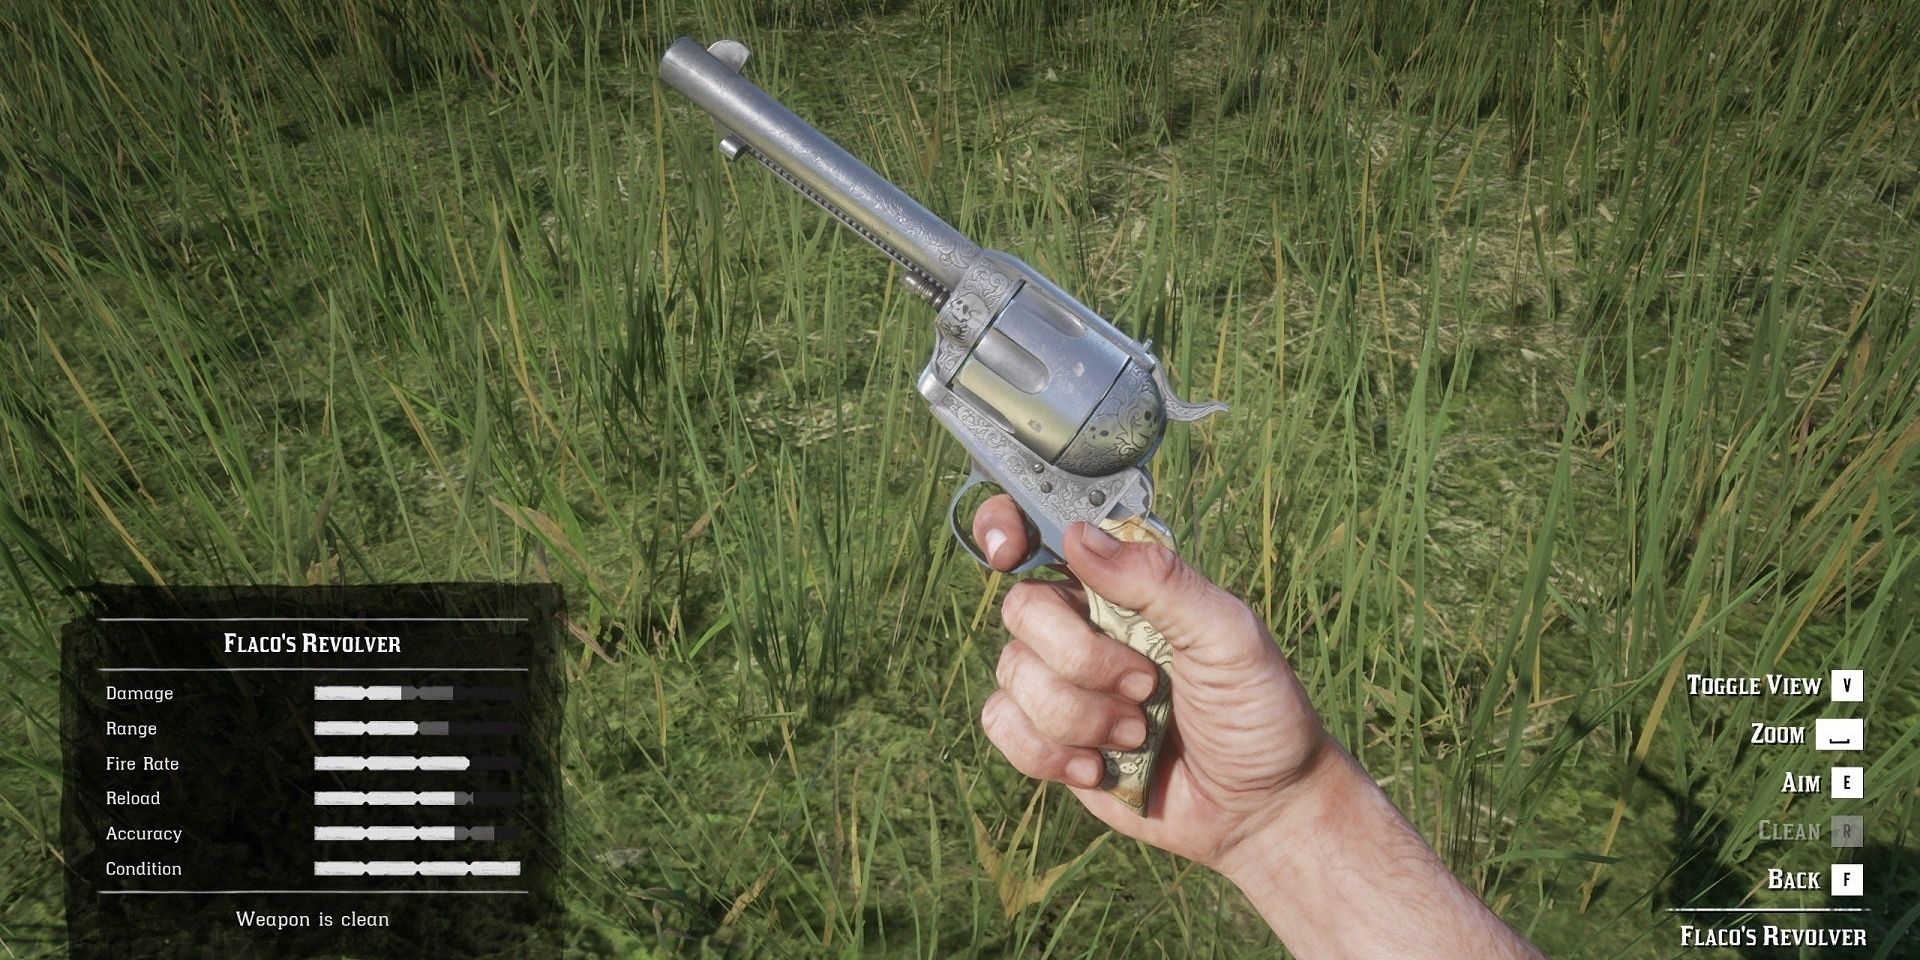 Flaco’s Revolver in Red Dead Redemption 2